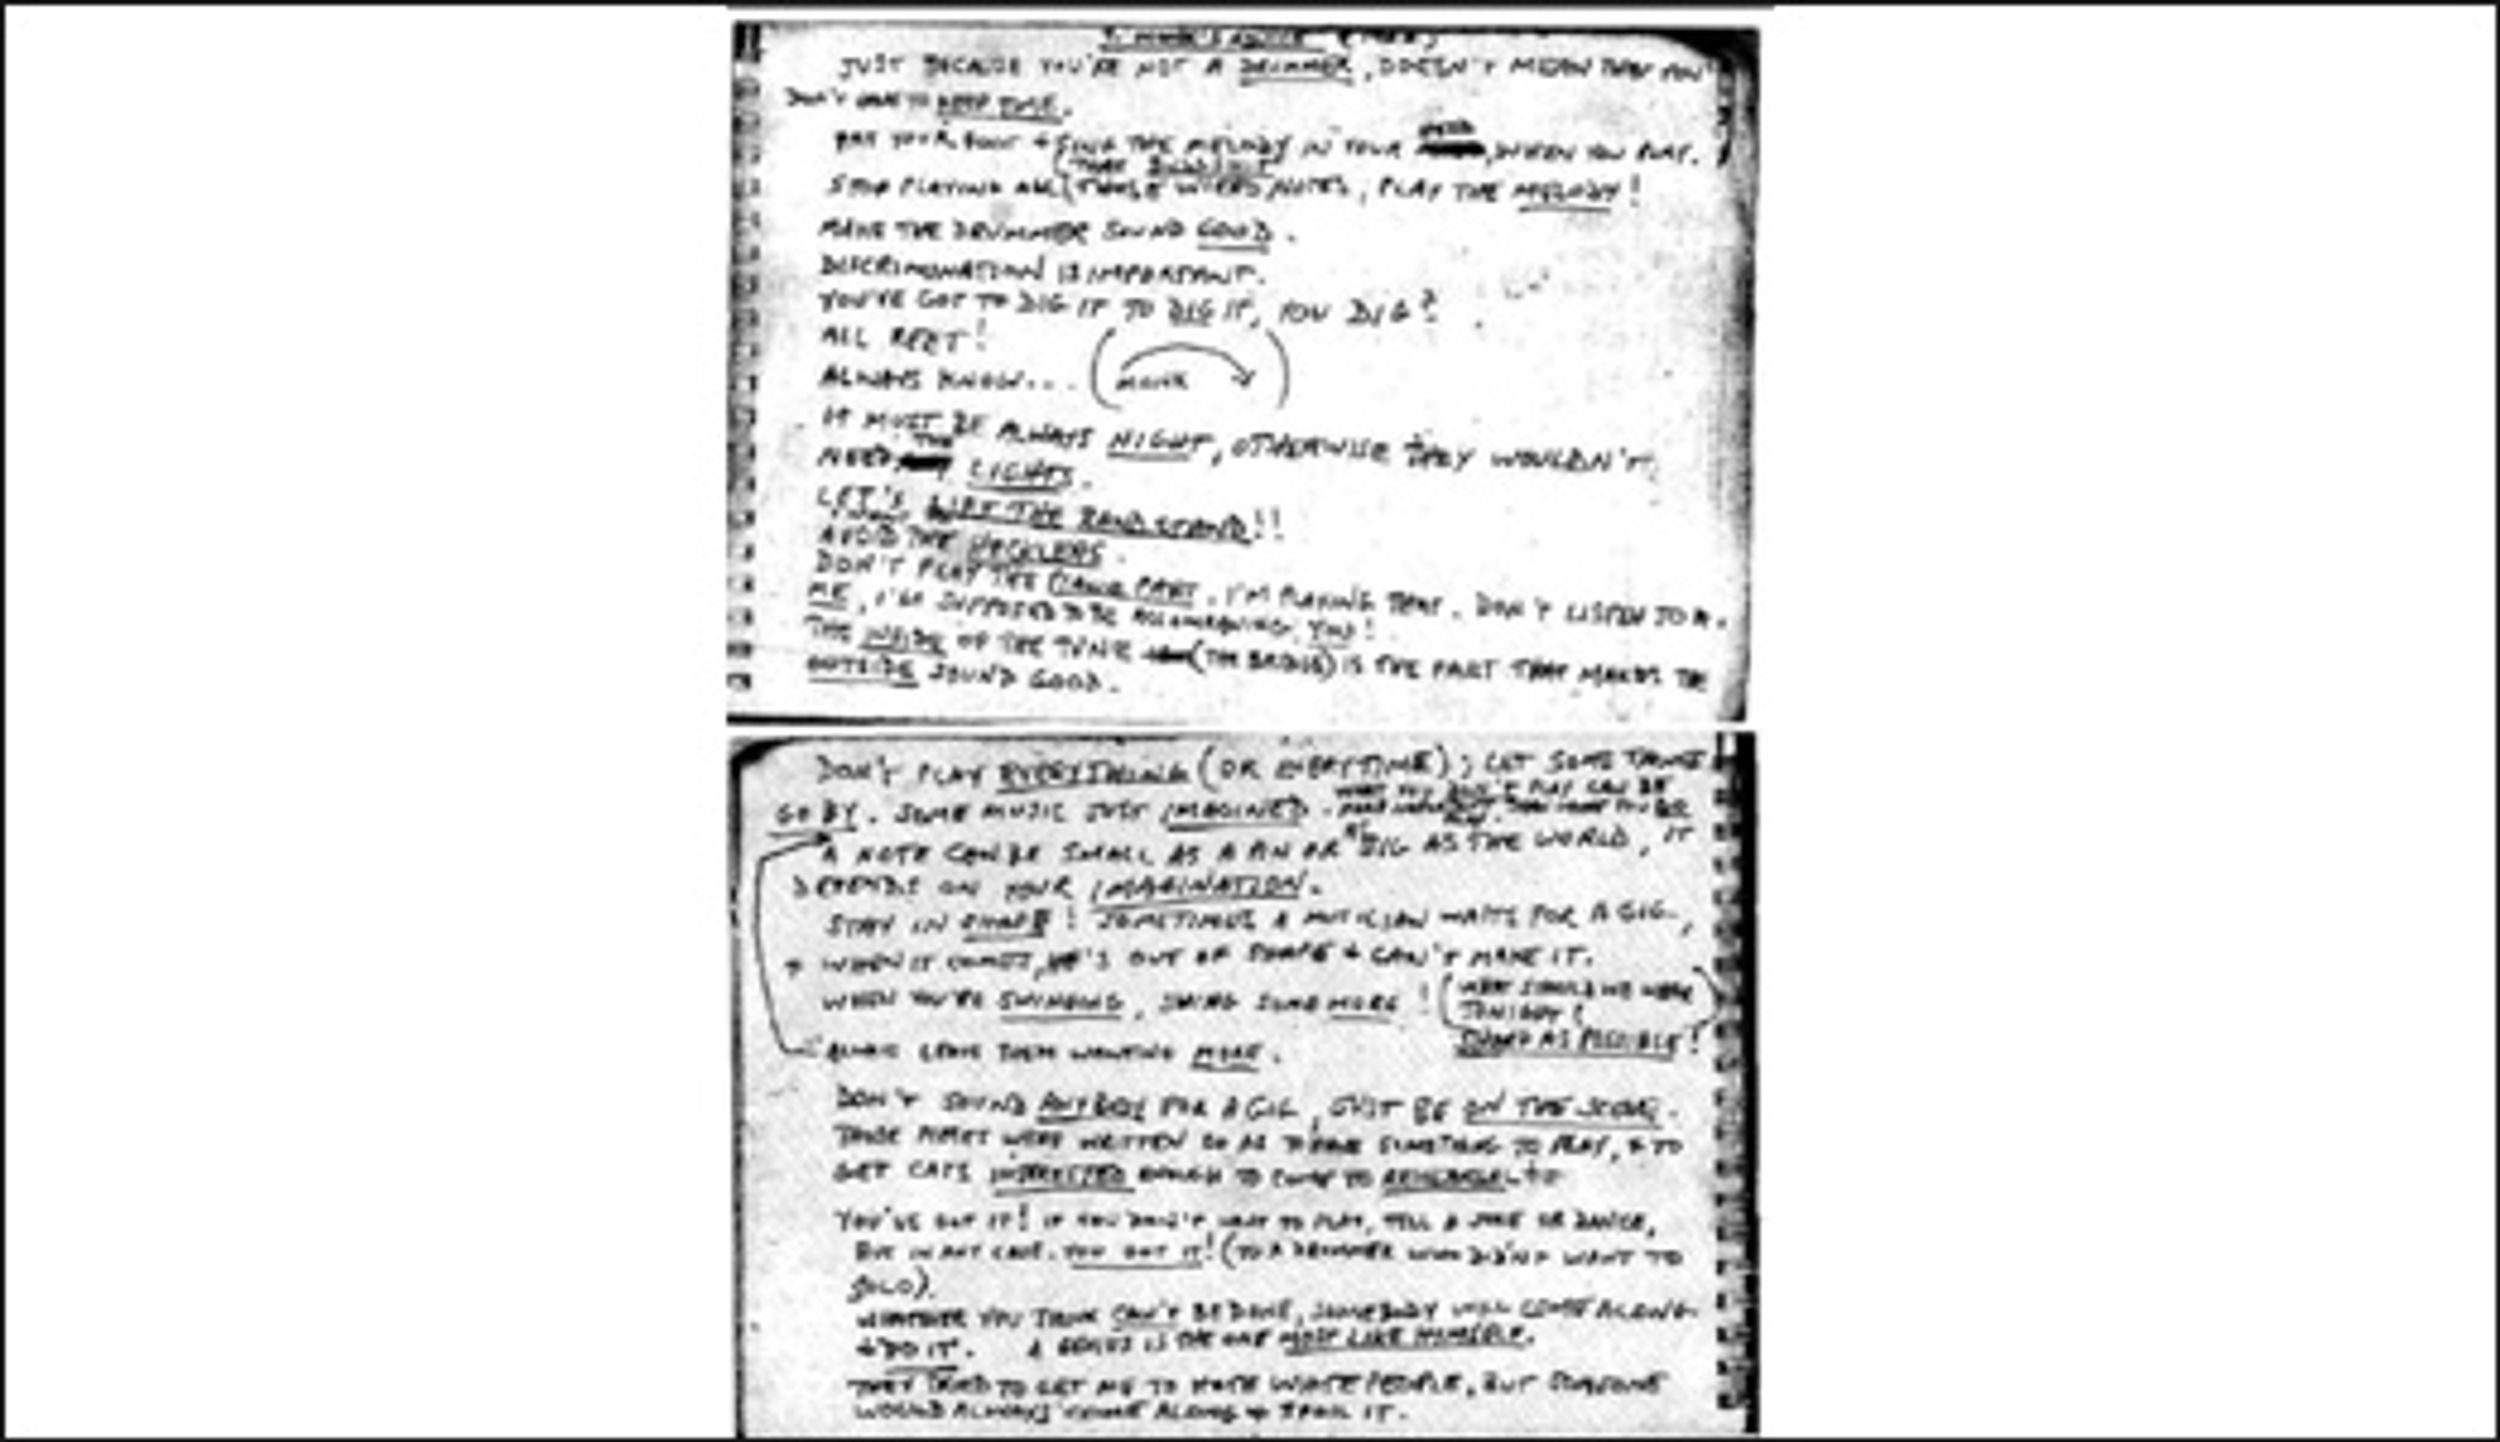 A snapshot of saxophonist Steve Lacy's notebook from 1960, where he jotted down advice given by his boss at the time, jazz pianist Thelonious Monk.